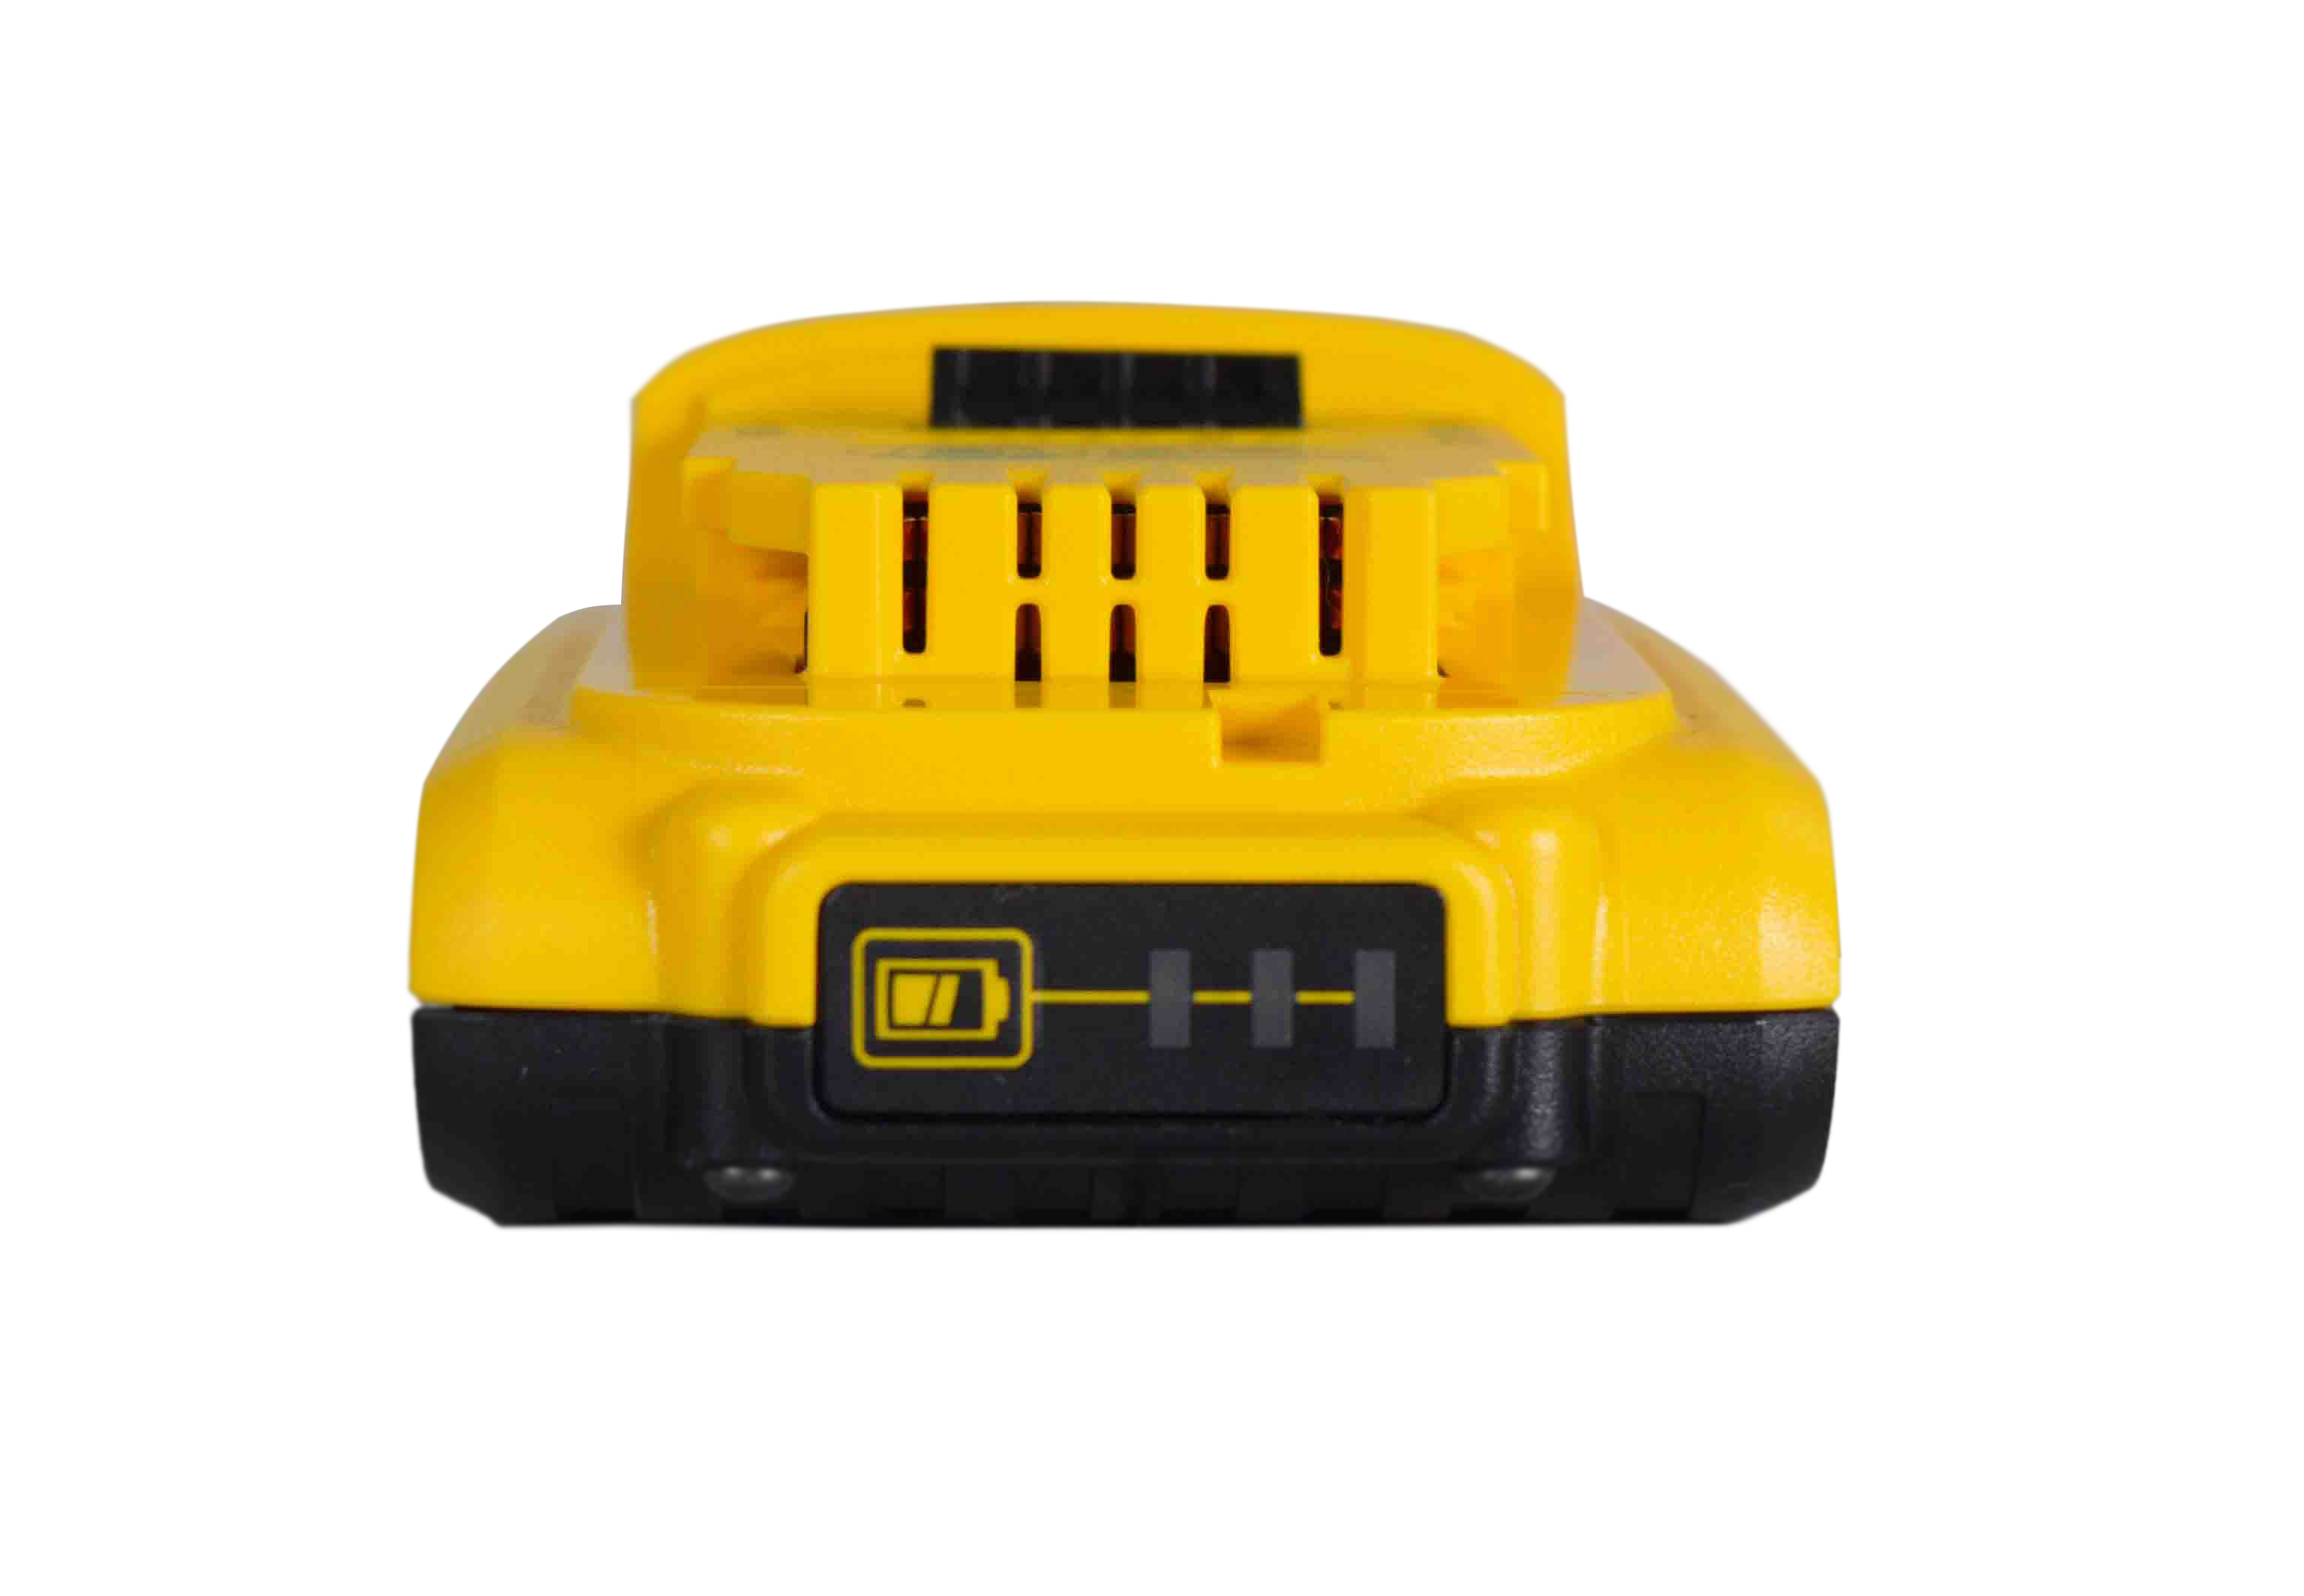 DeWALT Max Compact Lithium-Ion 20V 2Ah Battery DCB203 - Three Pack - image 5 of 5